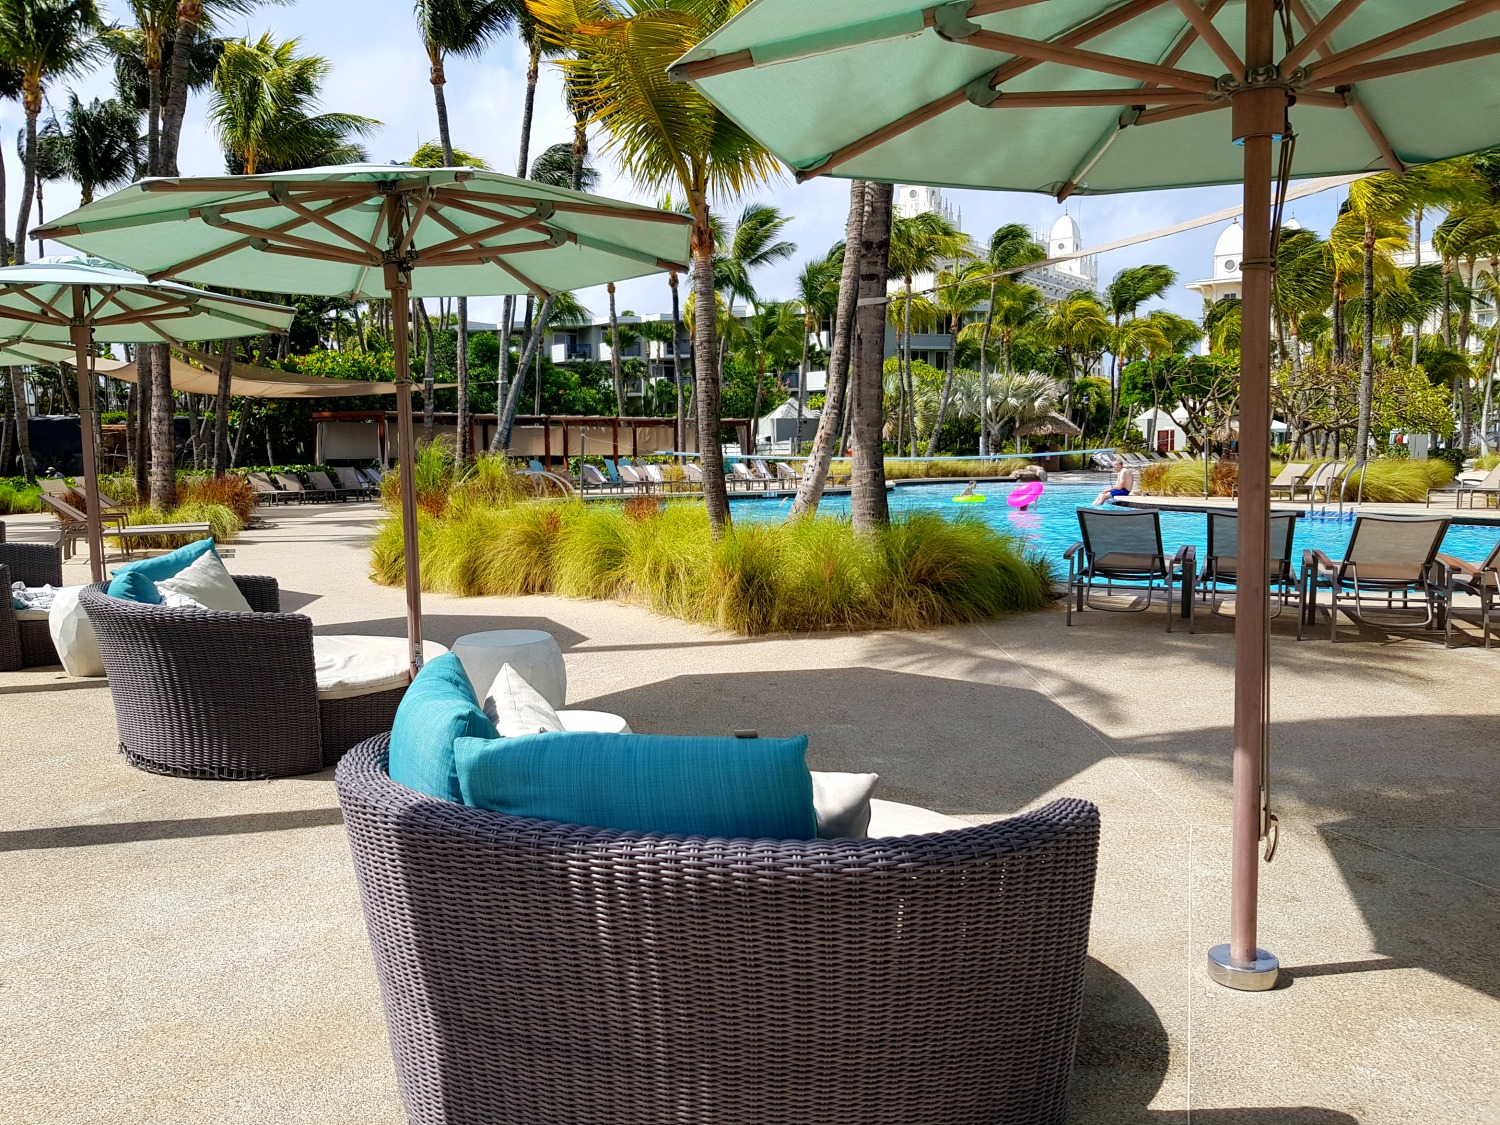 Comfy seats and umbrellas around one of the pools at the Hilton Aruba - my Hilton Aruba review if you're wondering where to stay in Aruba with kids